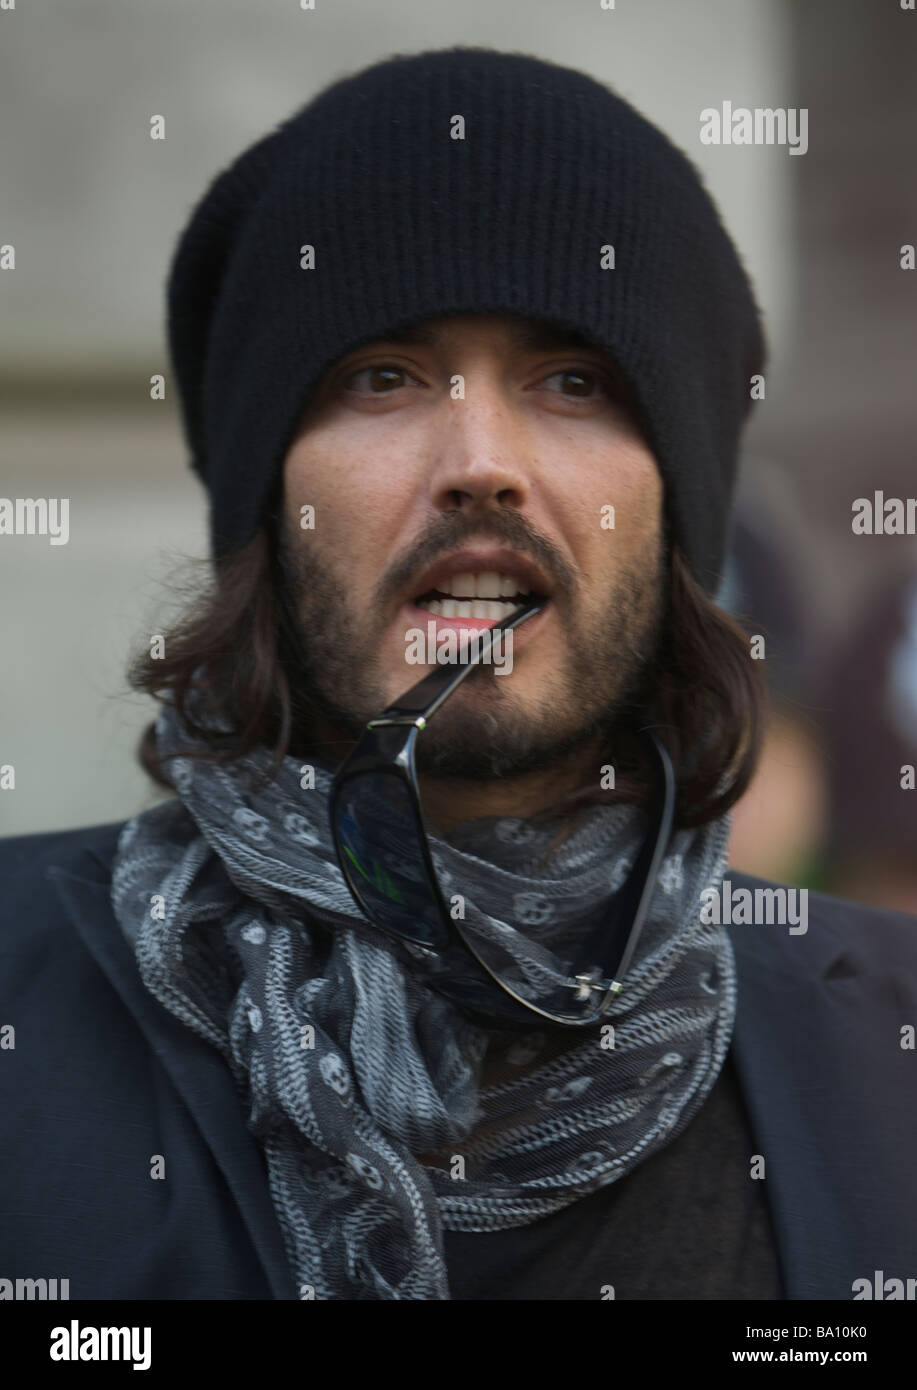 LONDON 1 April Pic shows Russel Brand at the G20 Protests at the bank of England Bank Of England London 1st of April 2009 Stock Photo